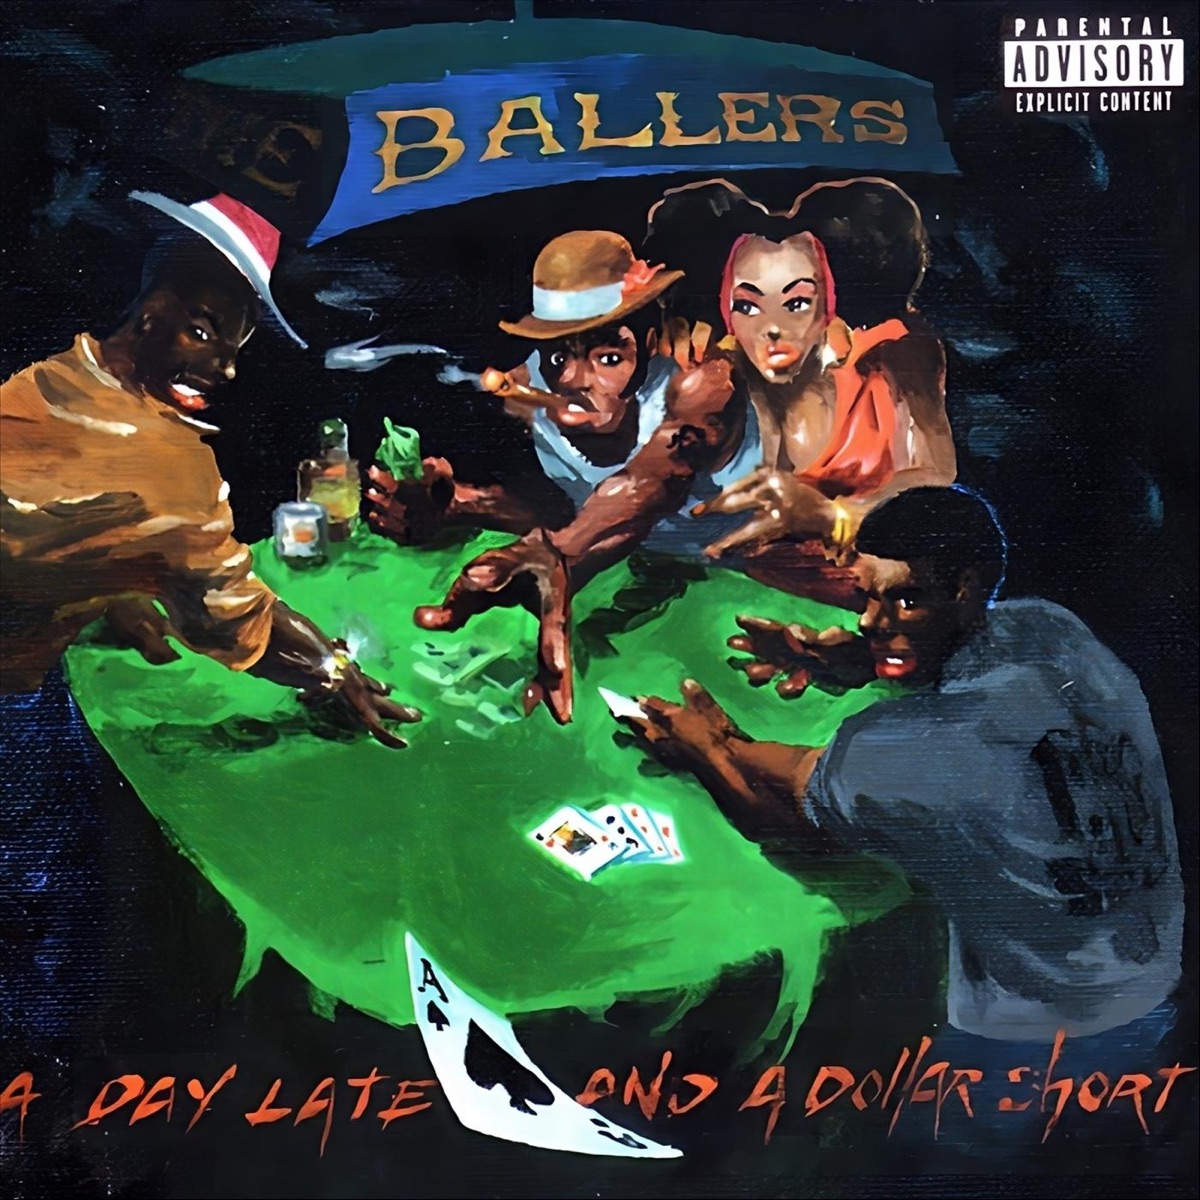 The Ballers Day Late and a Dollar Short-